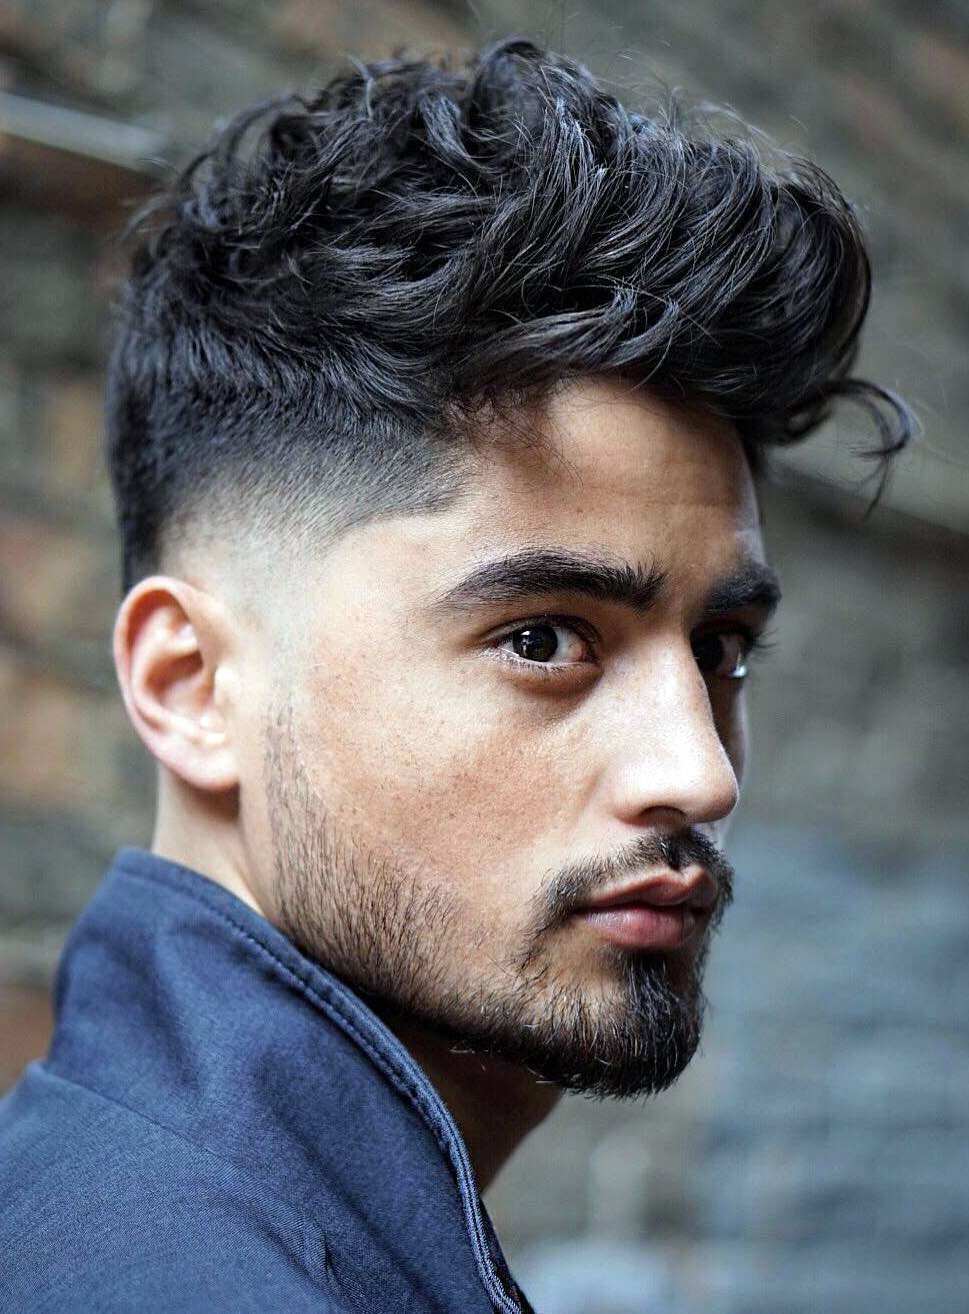 15 Indian Army Hairstyle for the Tough Look